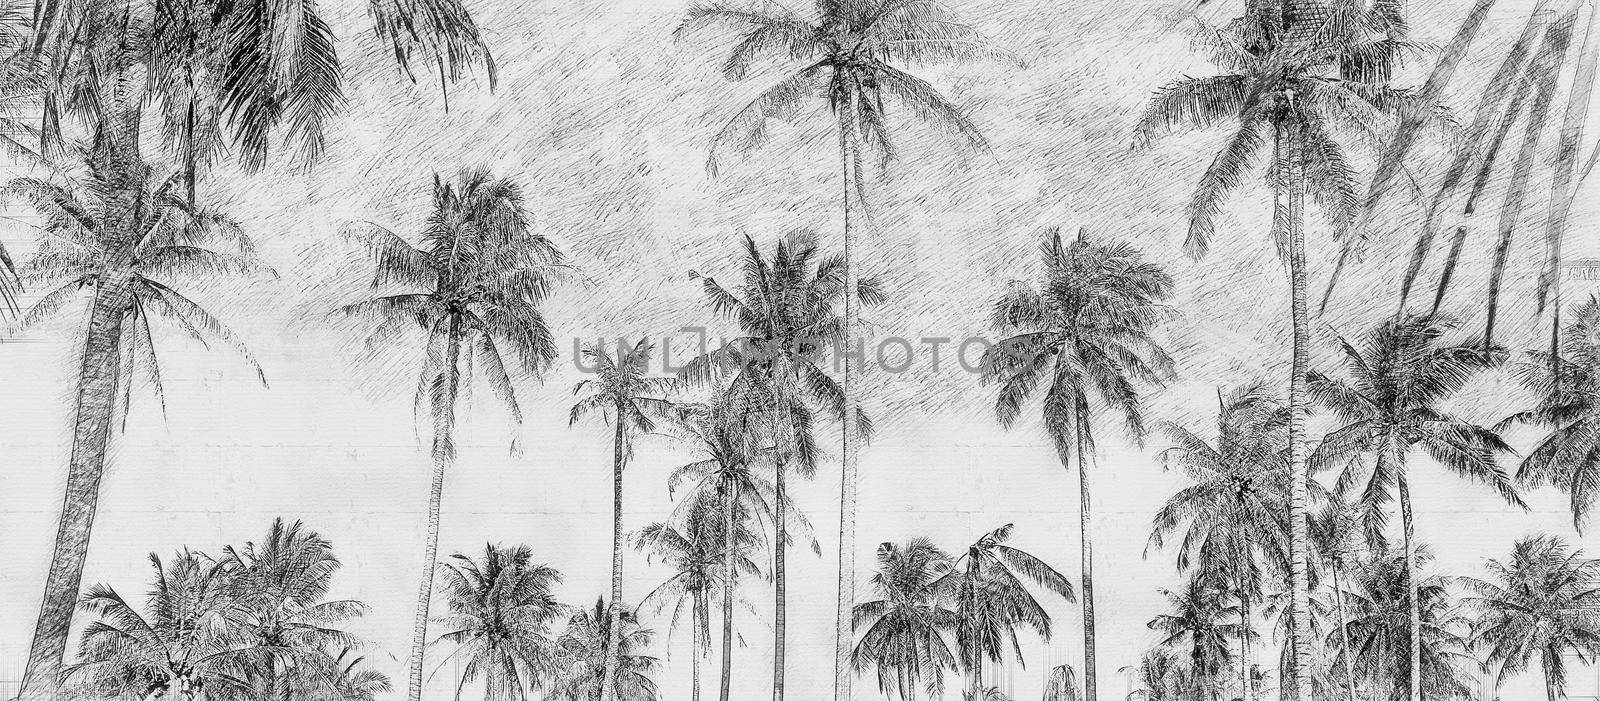 Coconut palm tree under blue sky. Vintage background. hand drawn style pencil sketch by Mariakray